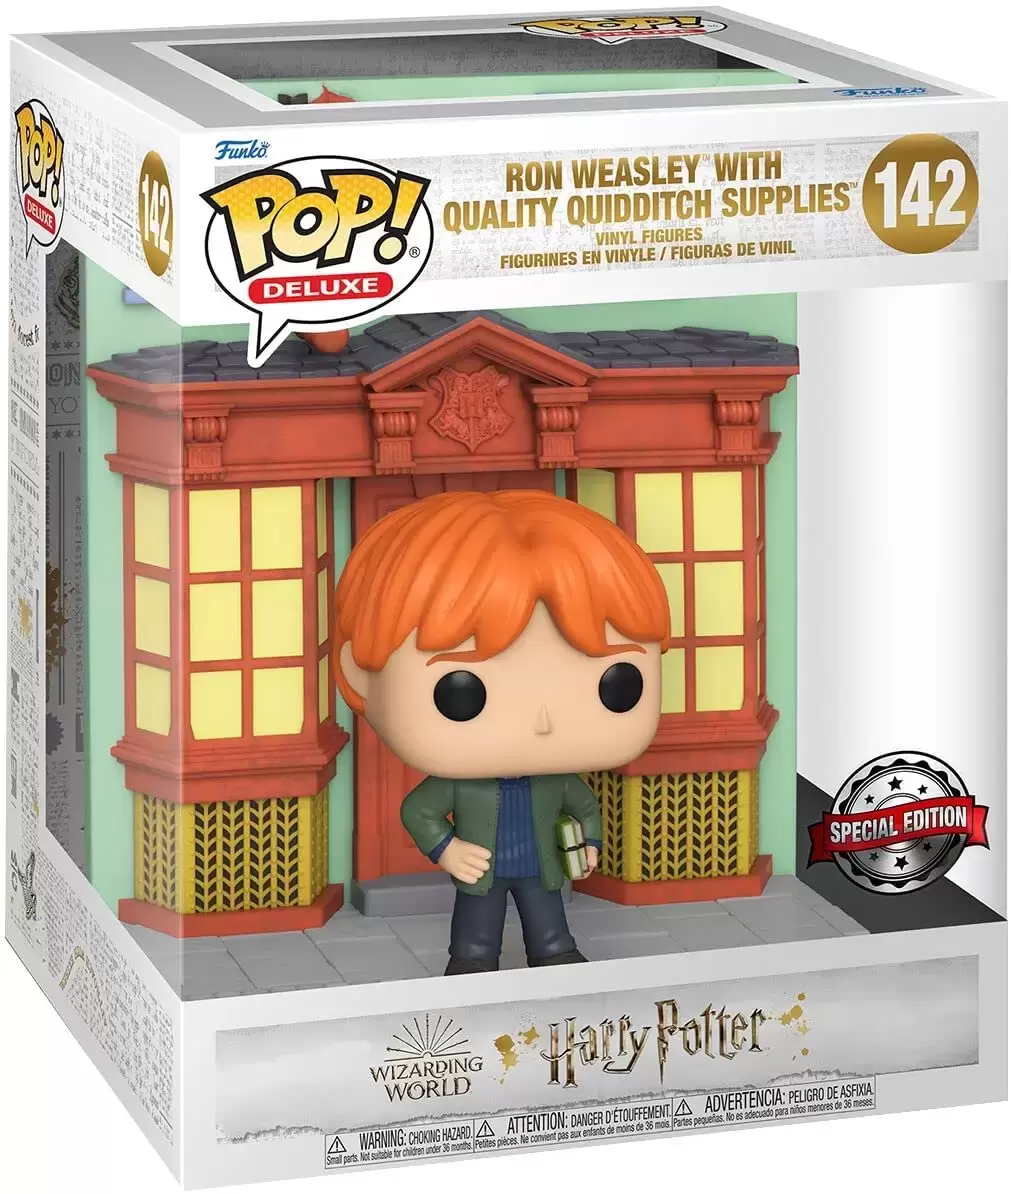 Ron Weasley with Quality Quidditch Supplies - POP! Harry Potter